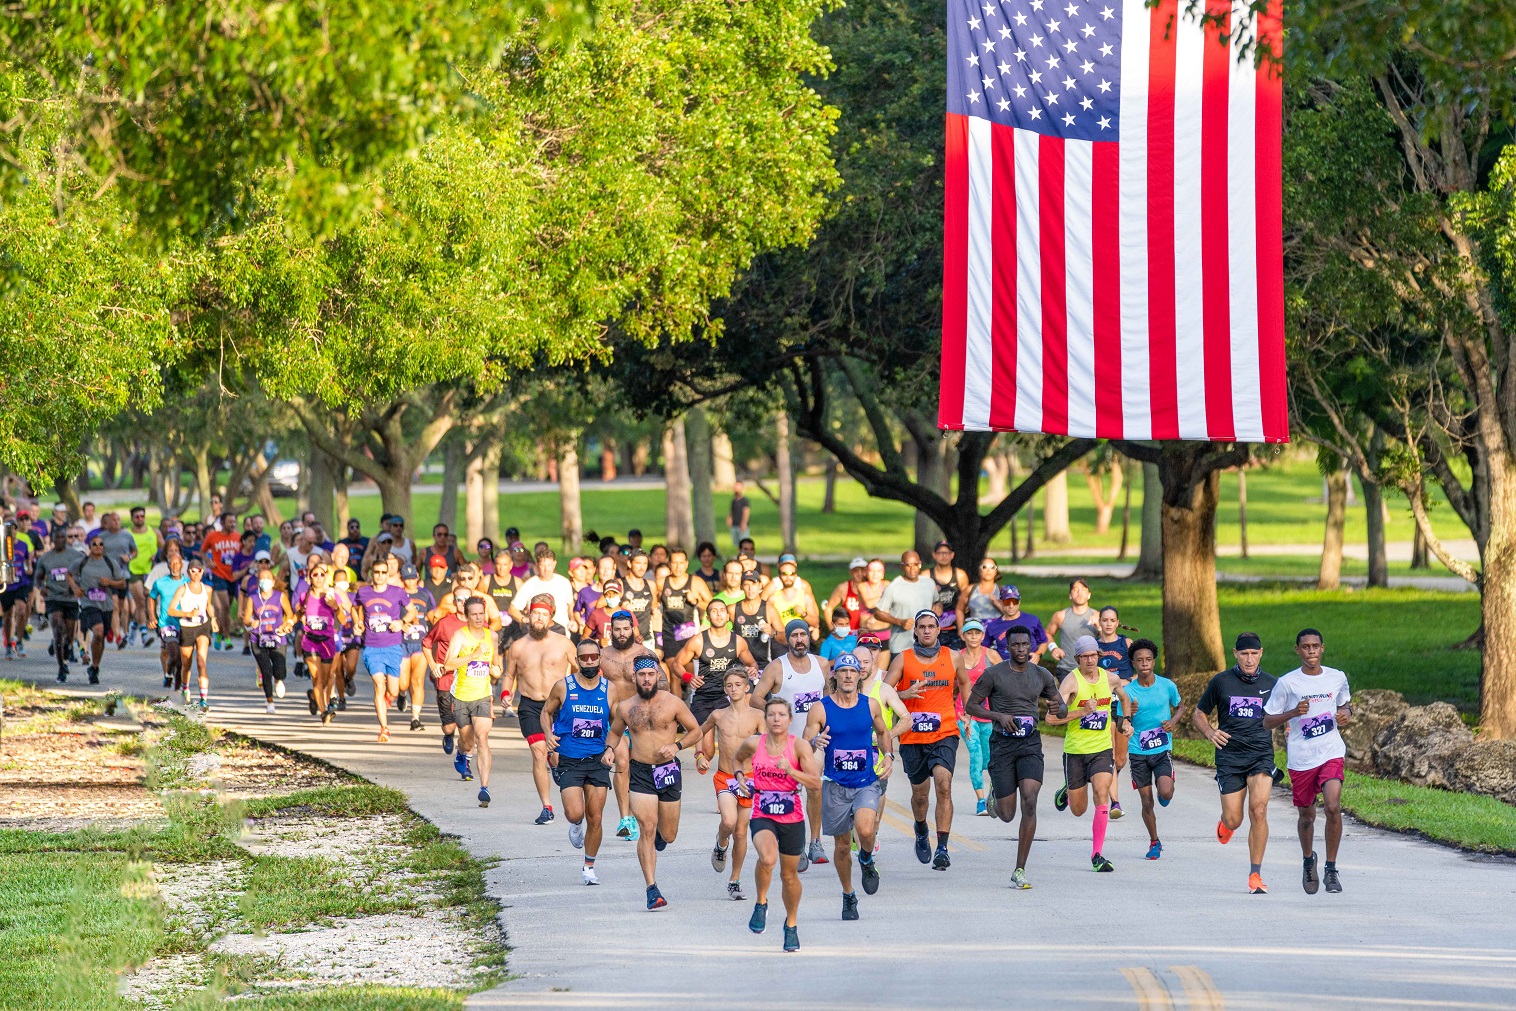 Runners Under American Flag_Small File Size